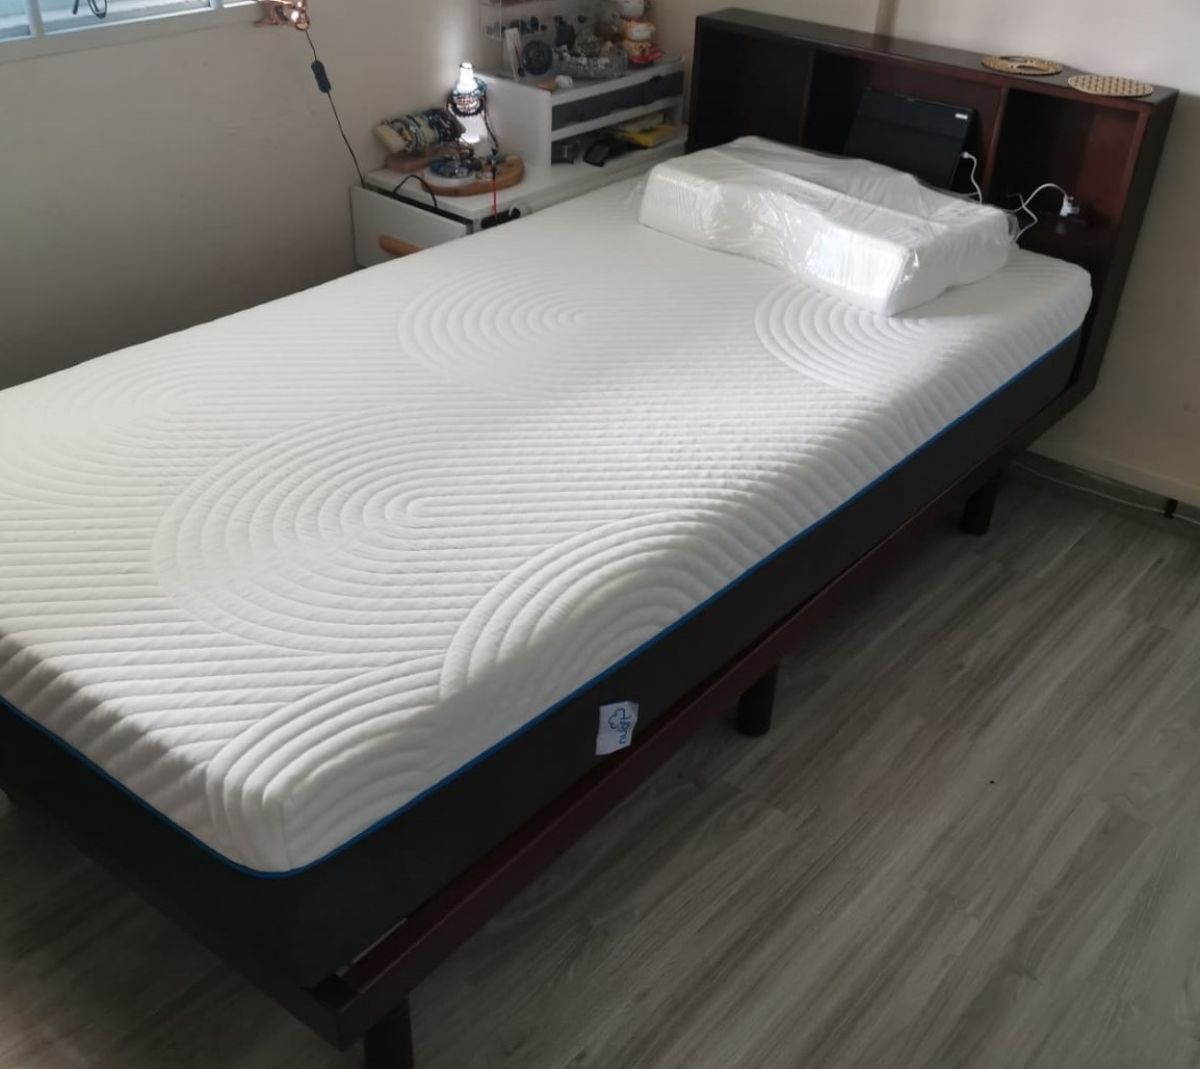 I purchased the Cuenca Bed Frame with Headboard (Japan Size). The item is light but yet sturdy. It is solid wood not compressed wood board. another good feature is the built-in power and USB socket